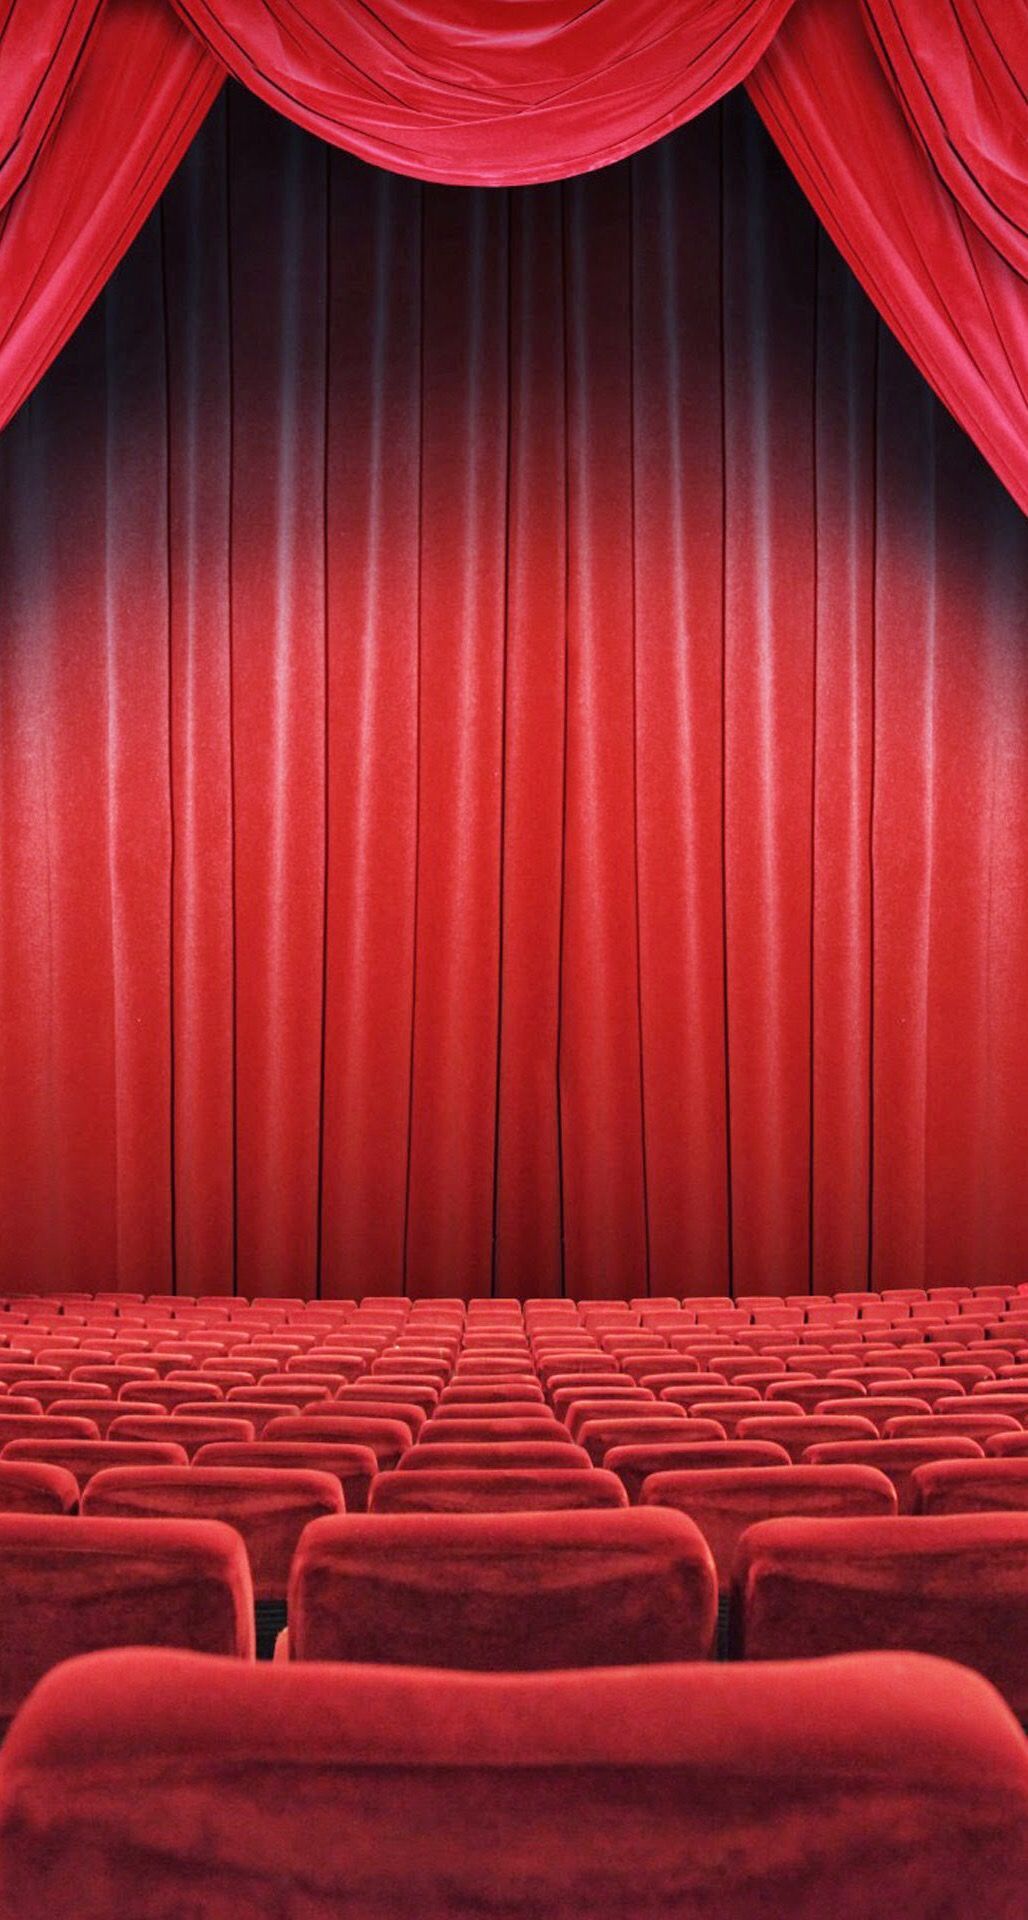 Android, Samsung, Wallpaper. Movie theater, Red curtains, Theater seating